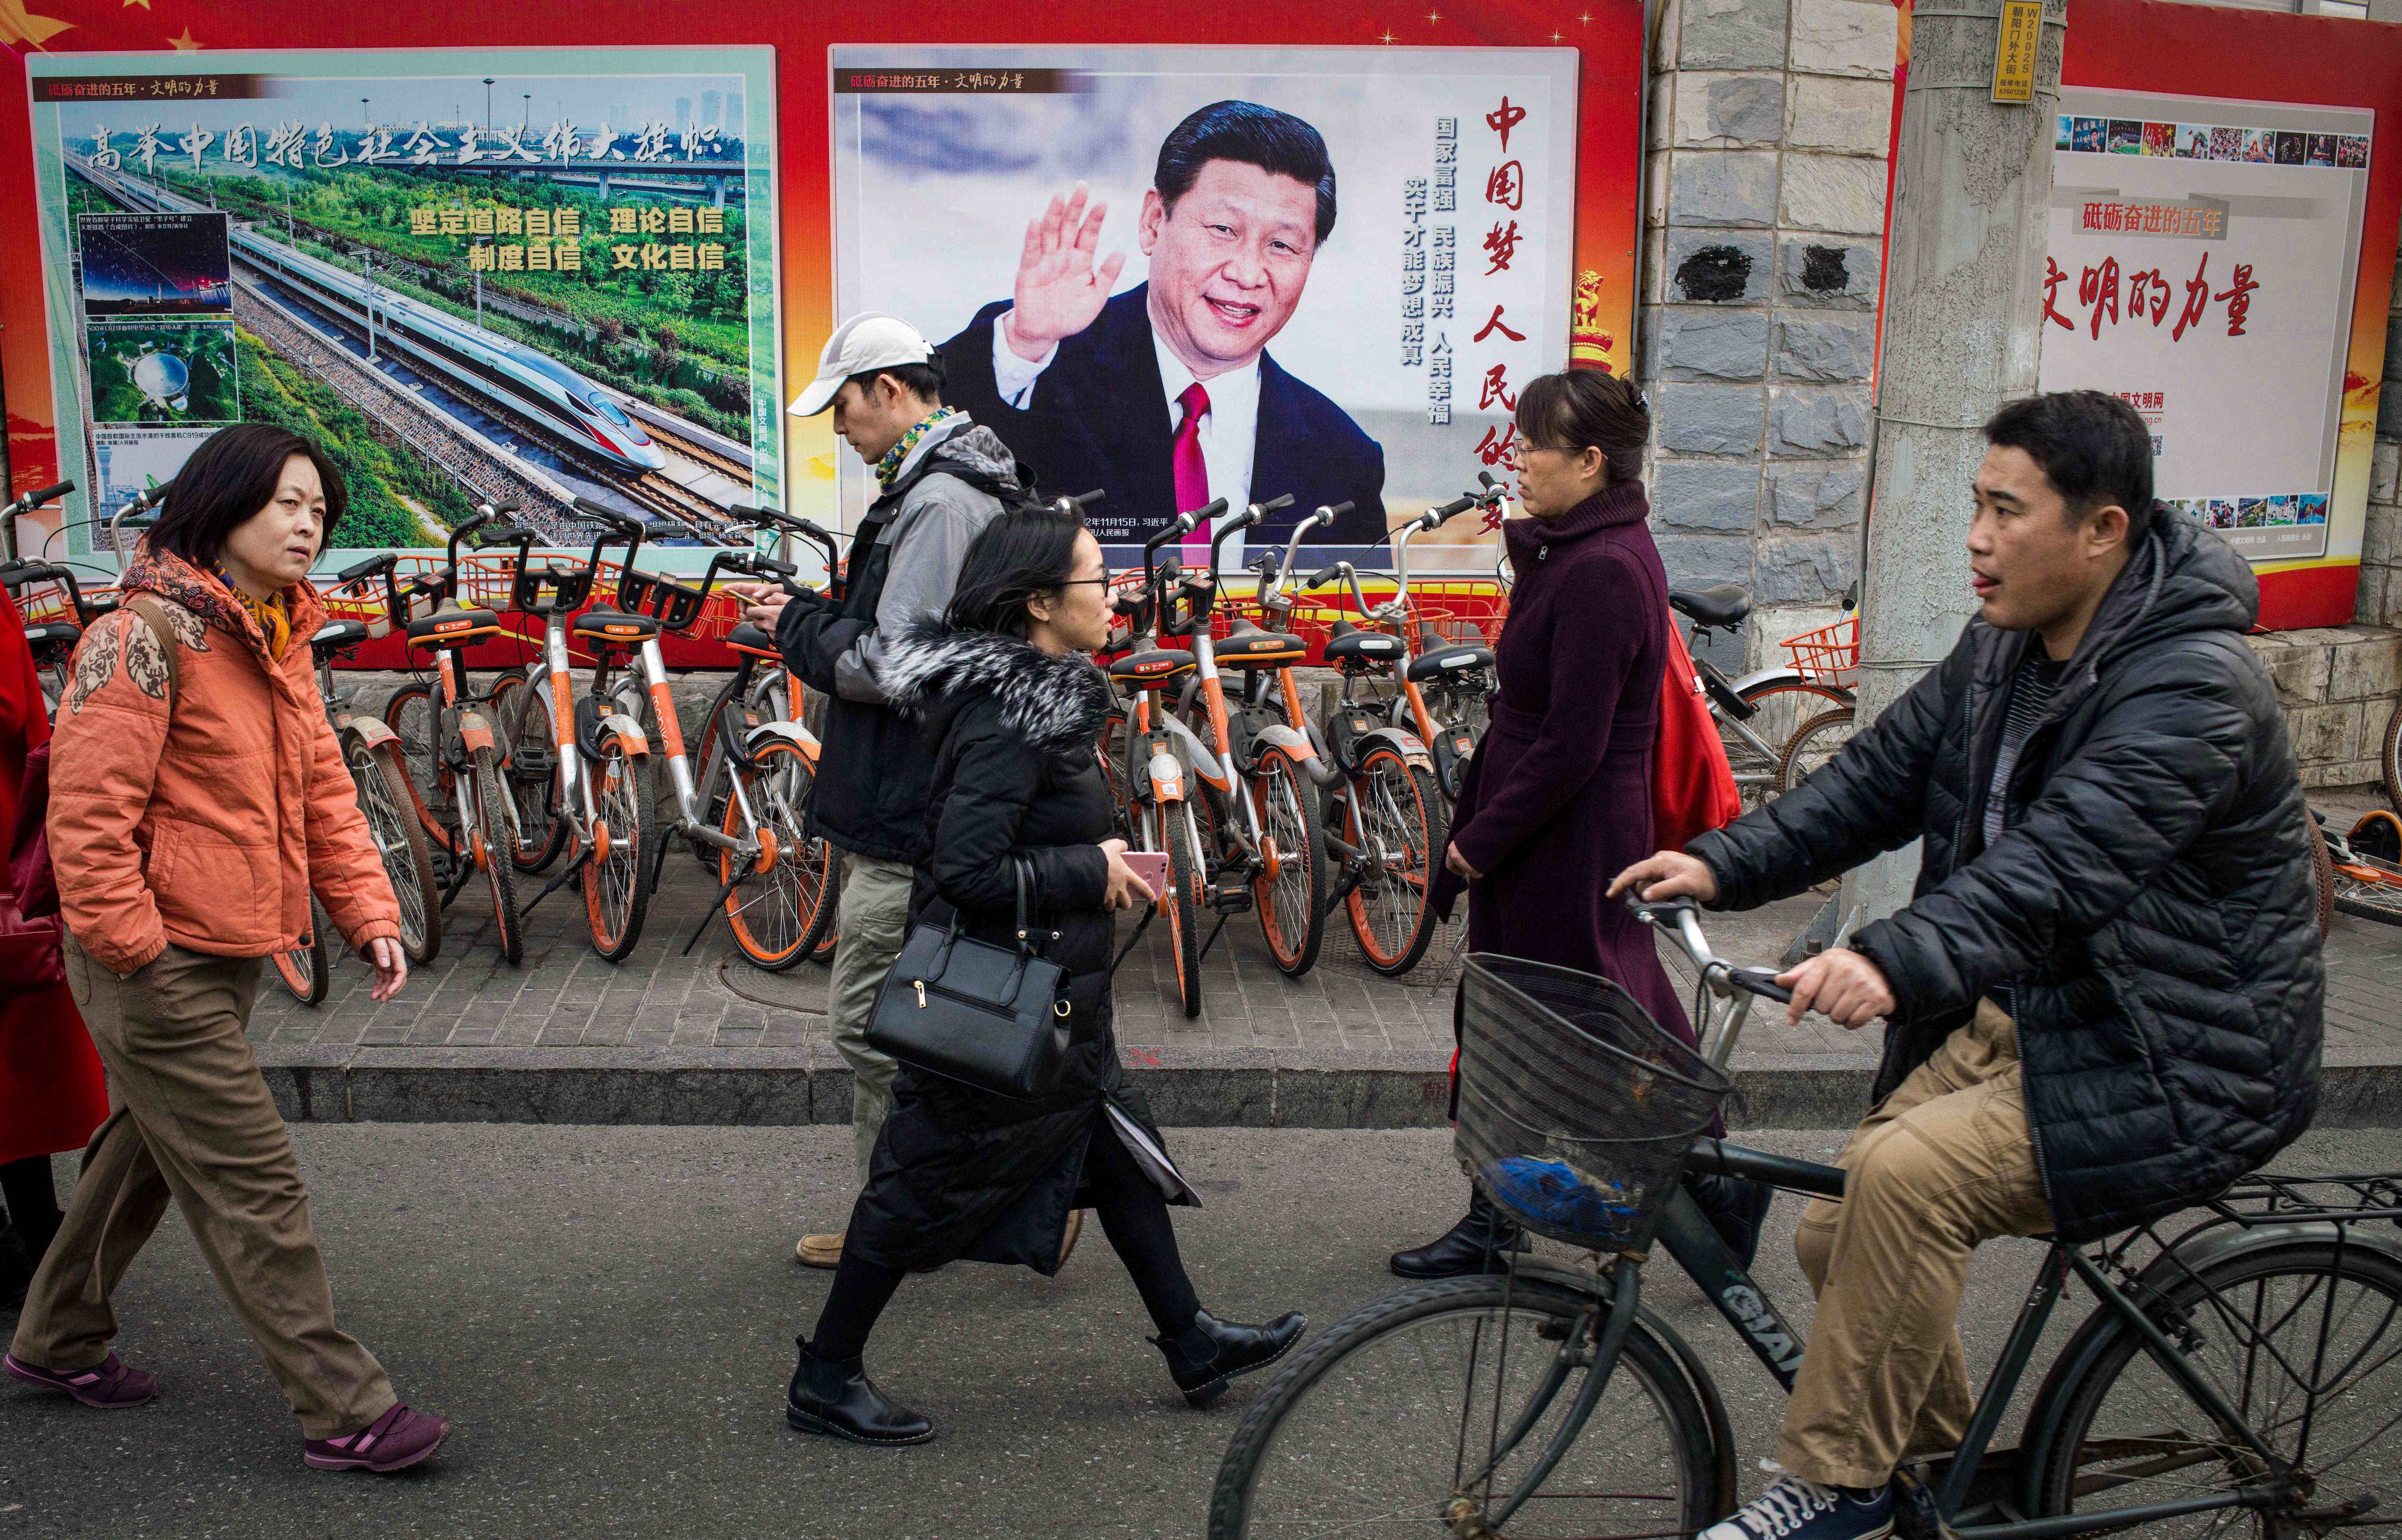 Hunan province in central China has named its campaign after a party slogan from the post-Mao era that has also been used by President Xi Jinping to call for effective local governance. Photo: AFP